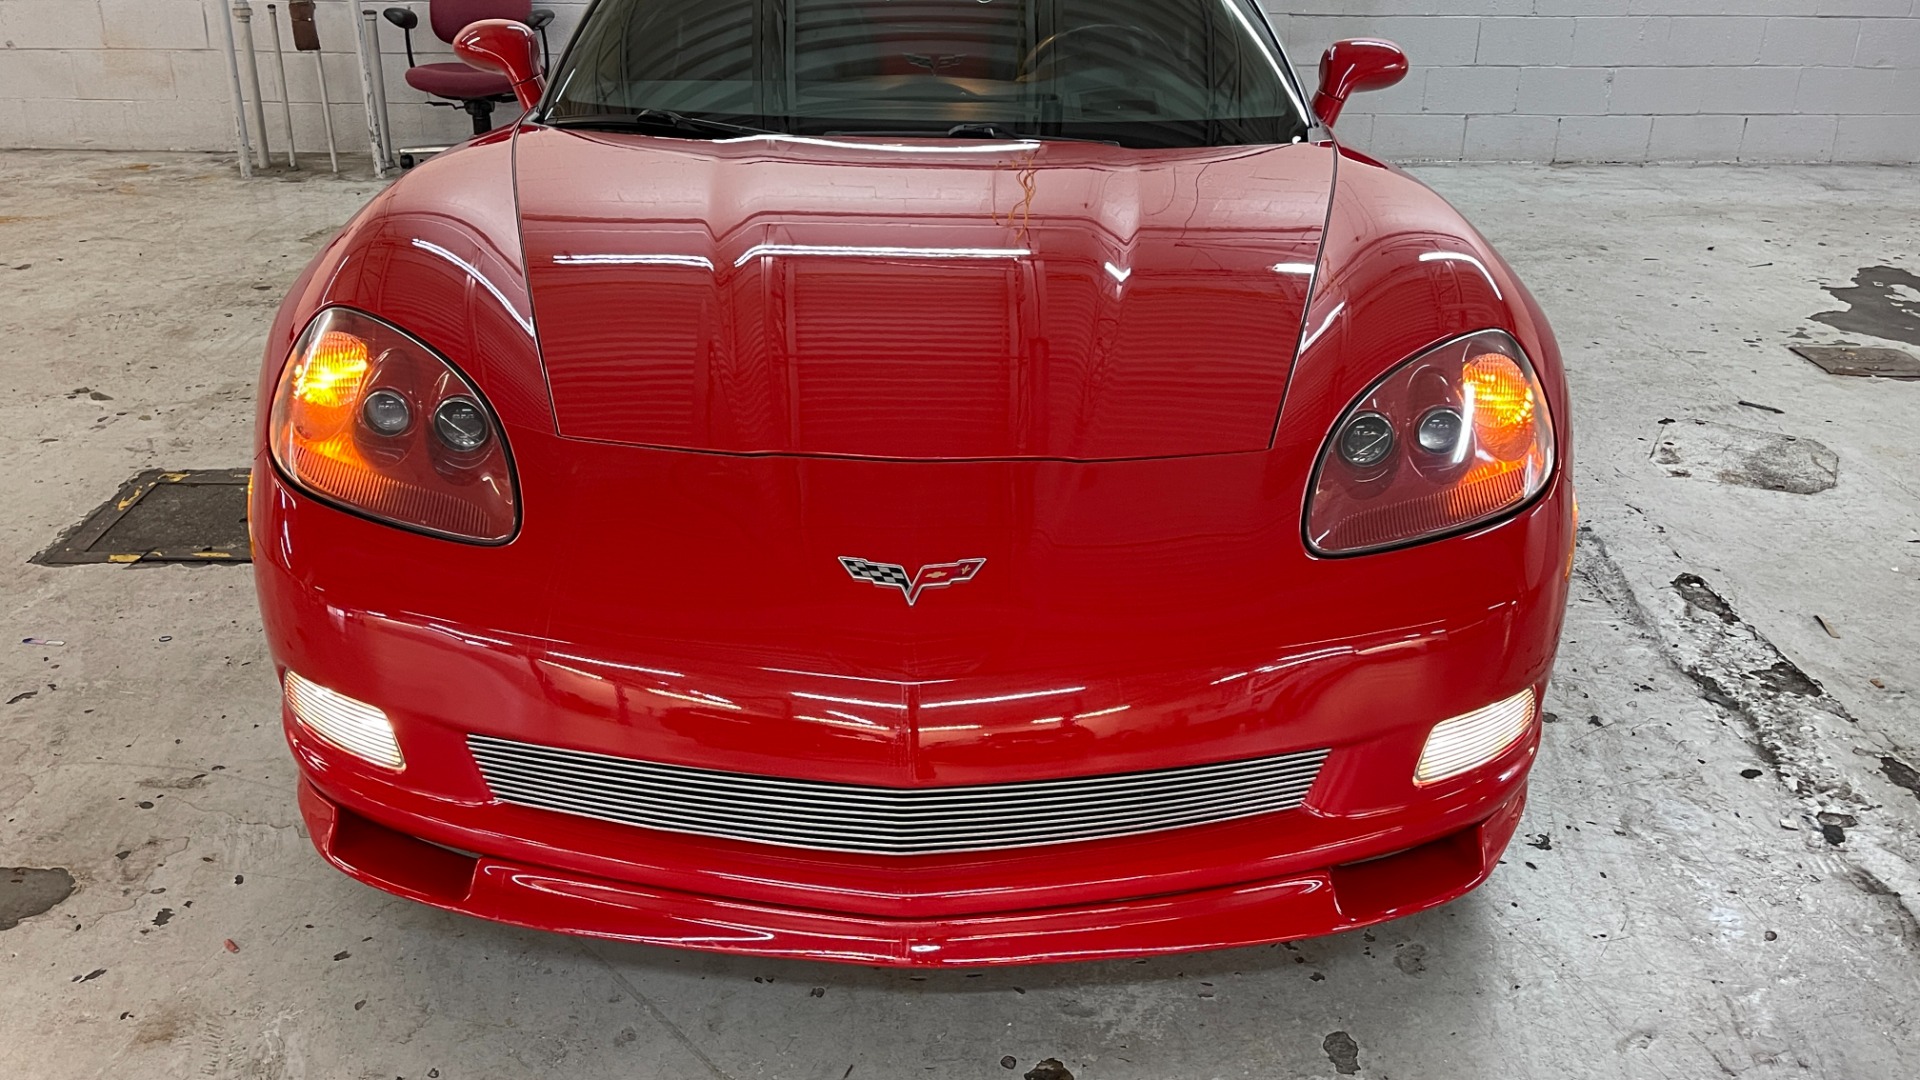 Used 2007 Chevrolet Corvette CONVERTIBLE / CORSA EXHAUST / AIRRAID INTAKE / 6.0L V8 / AUTOMATIC for sale $27,695 at Formula Imports in Charlotte NC 28227 19